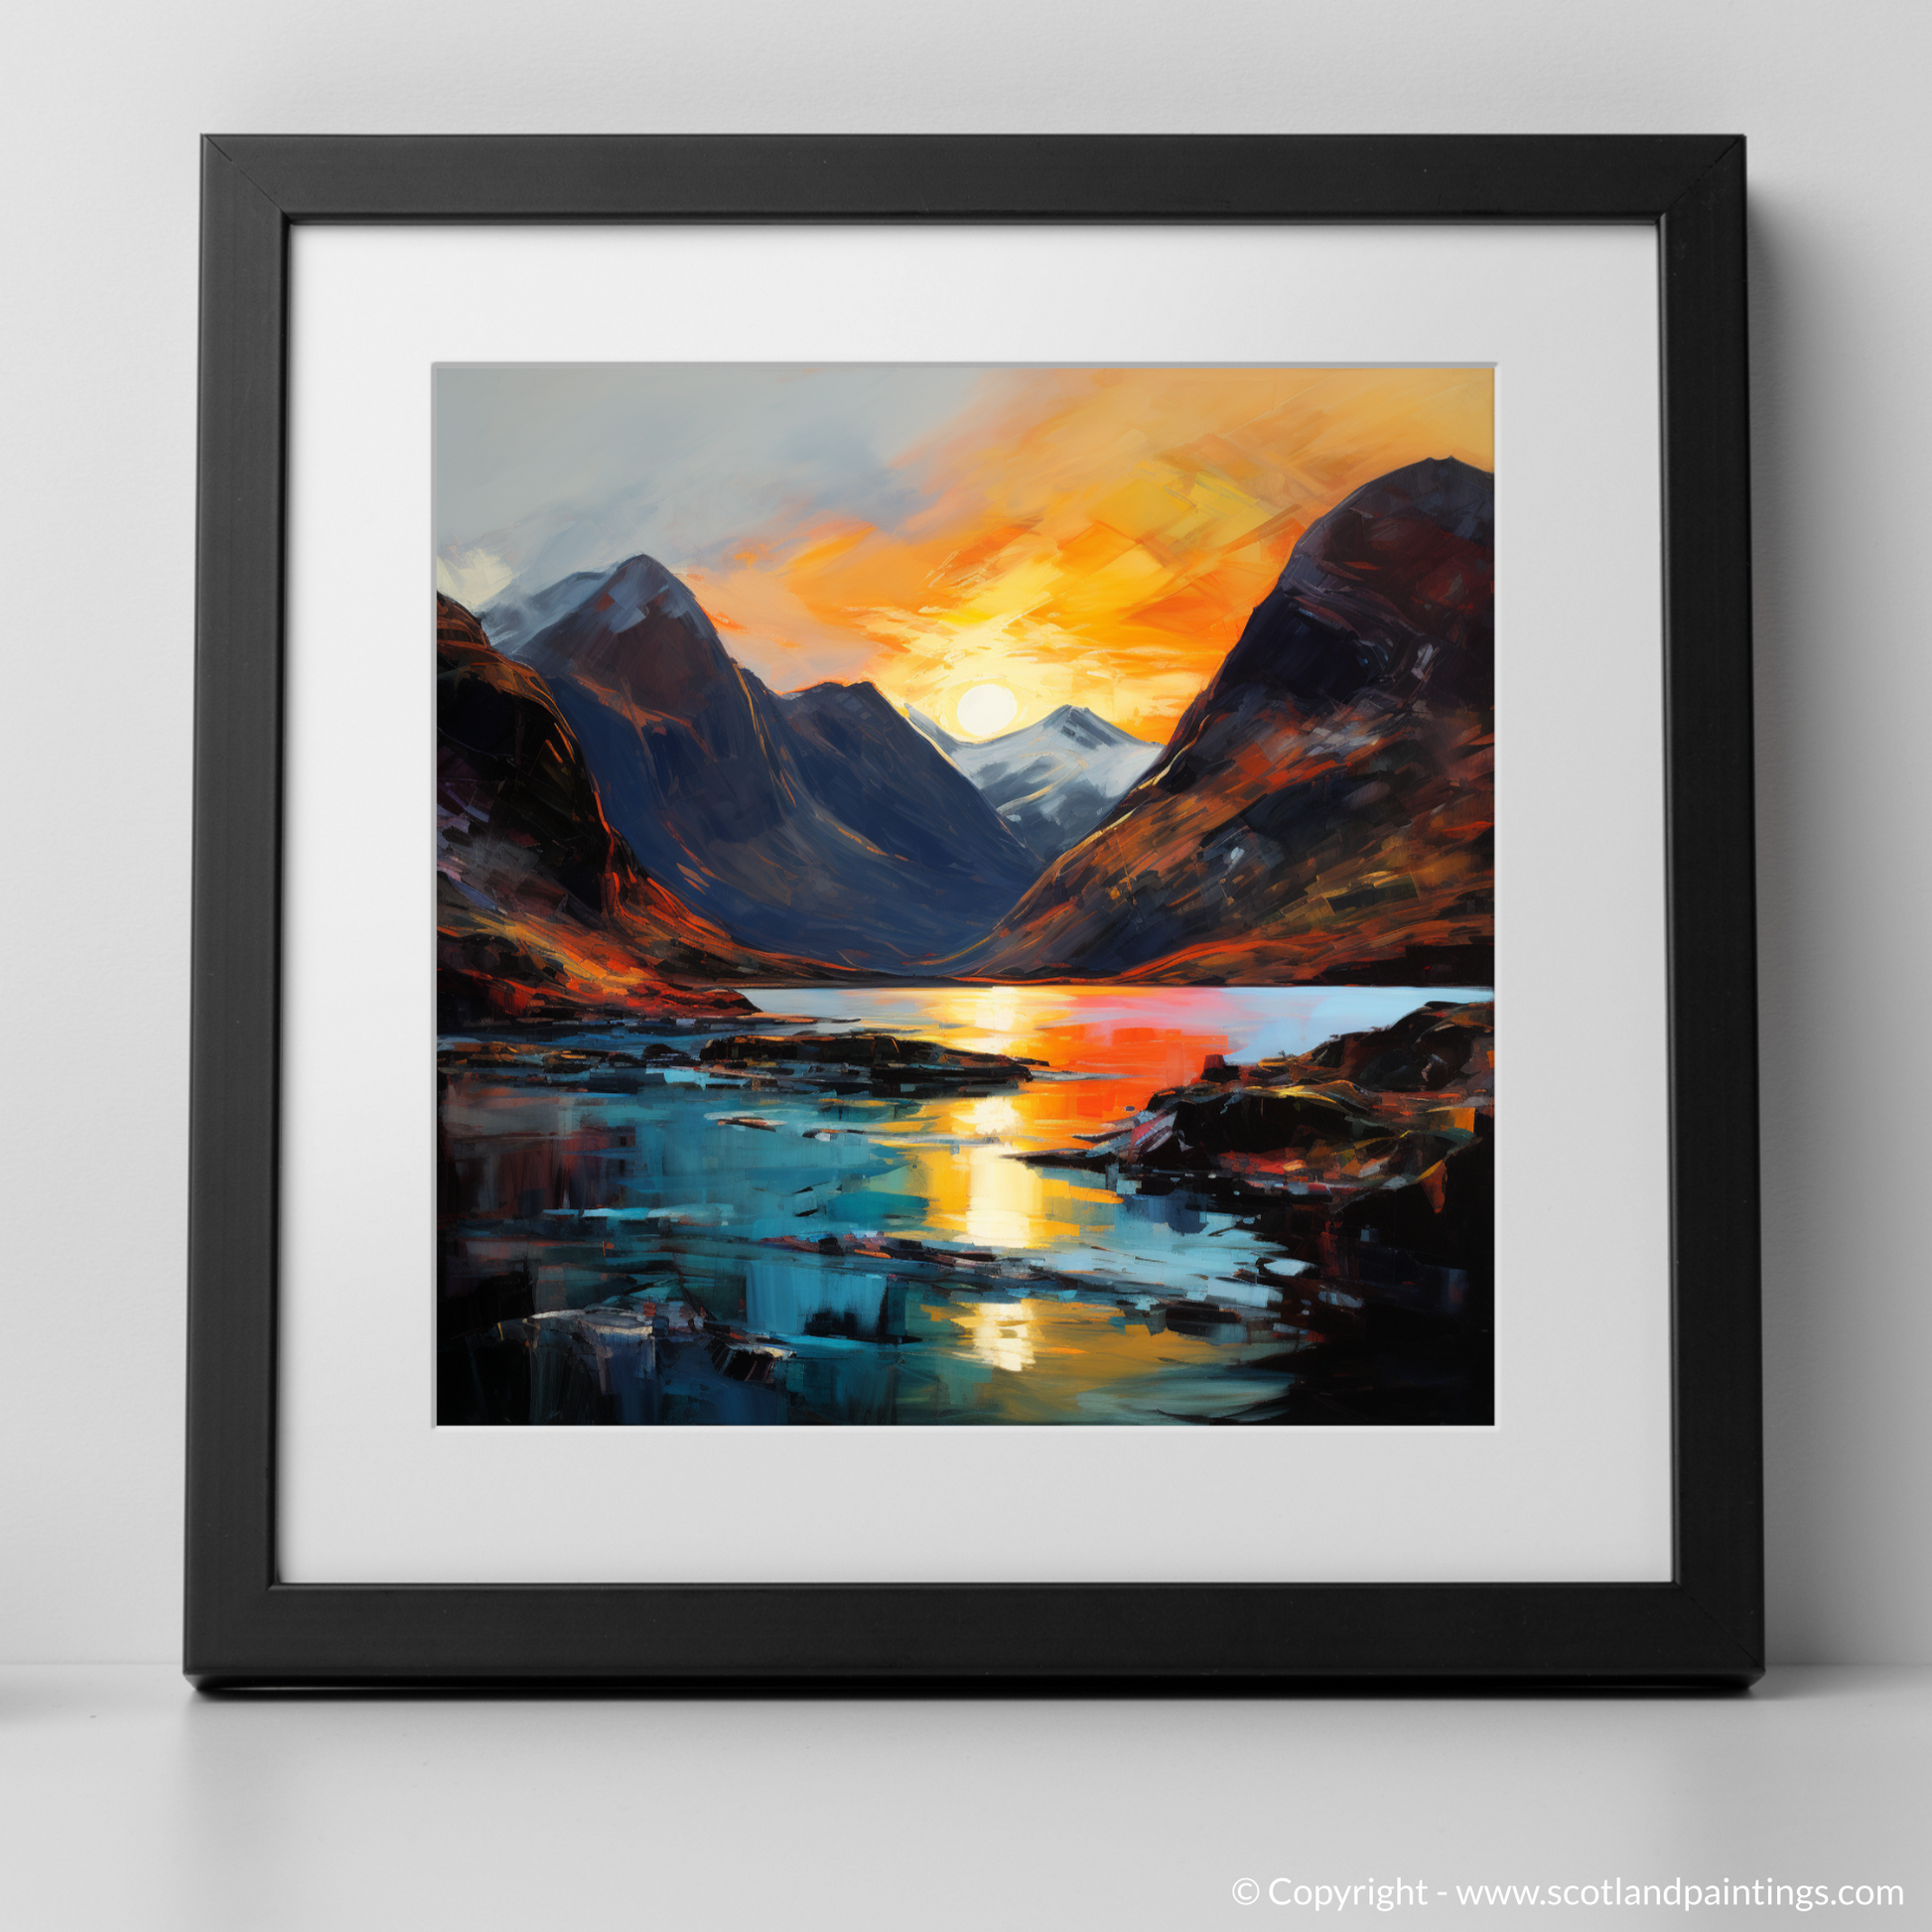 Art Print of Loch Coruisk at sunset with a black frame